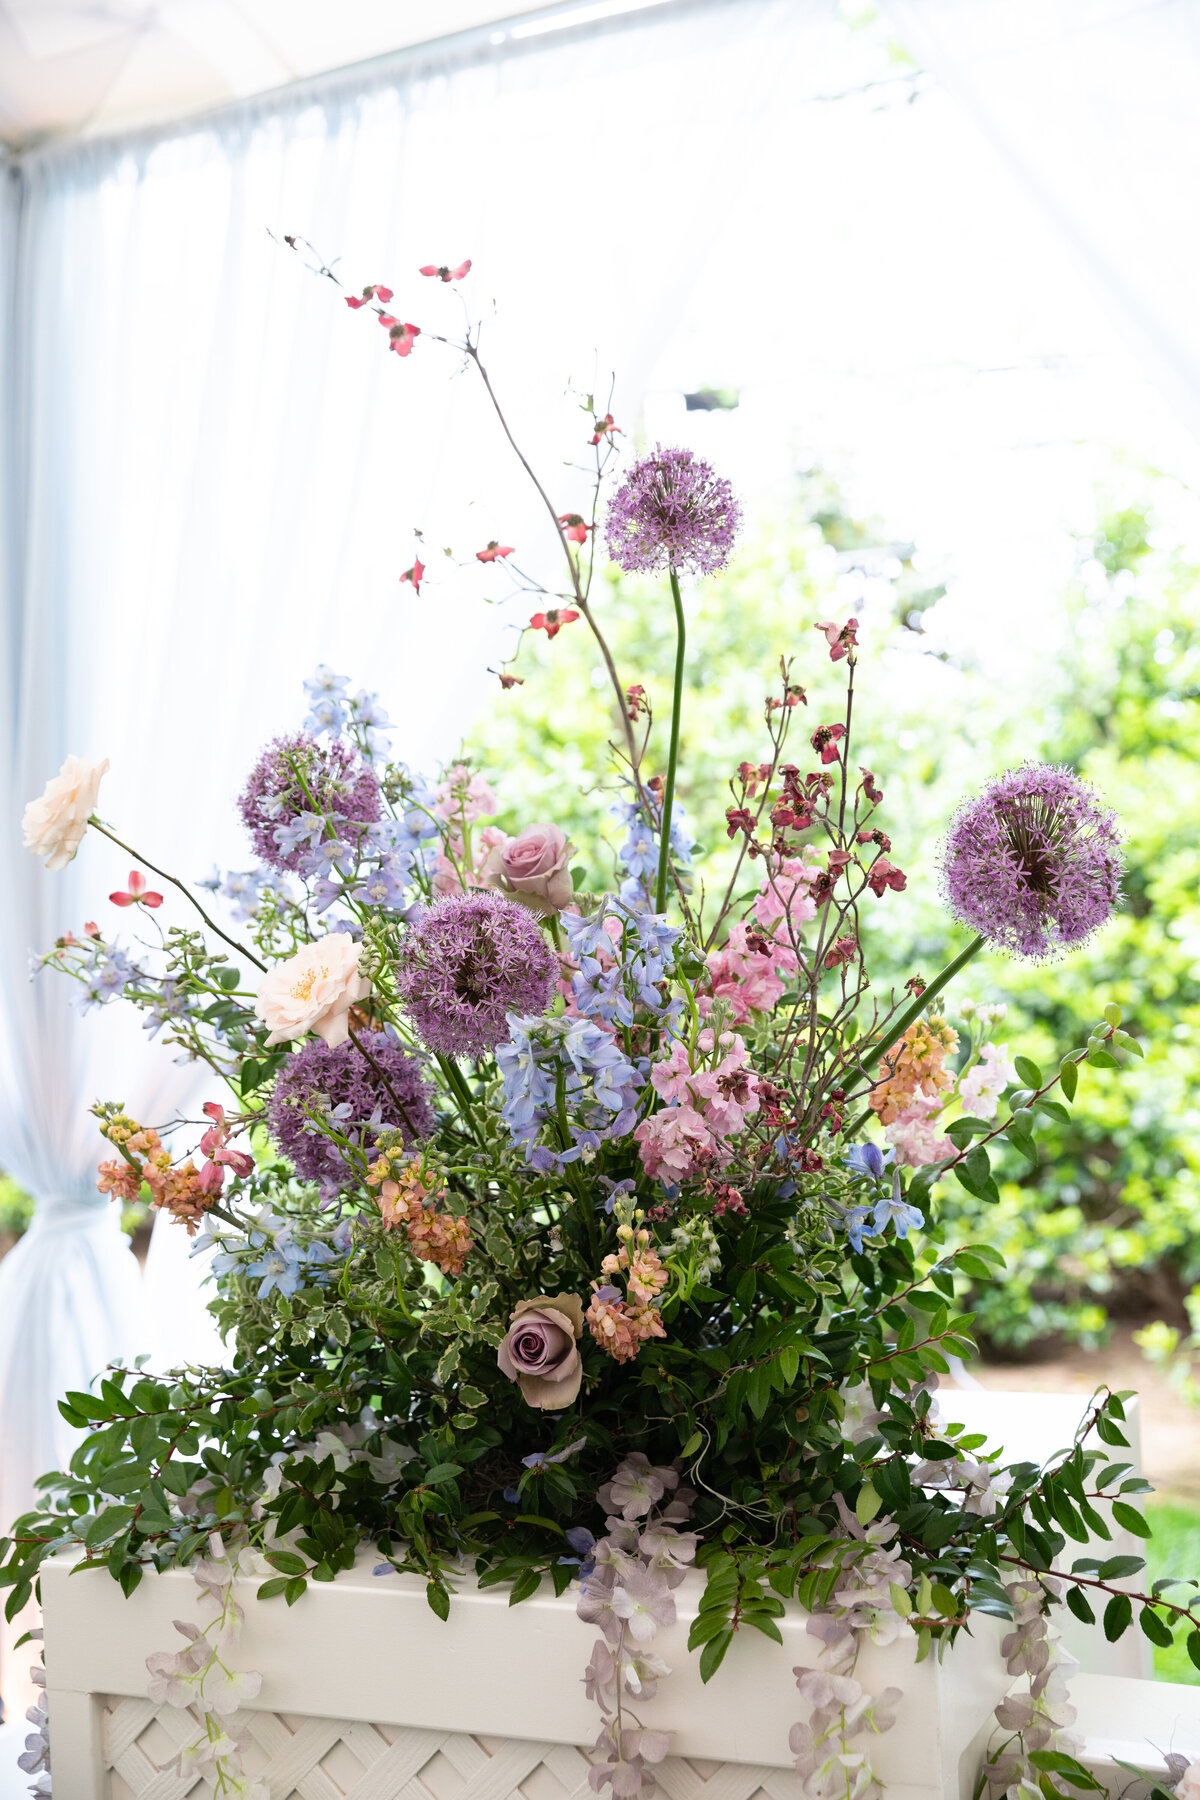 Growing, fresh floral installations with blush garden roses, lavender delphinium, wisteria, globe allium, and vines and greenery for a tented Bridgerton inspired engagement party at a private home in Nashville, TN. Flower by Tennessee based wedding f